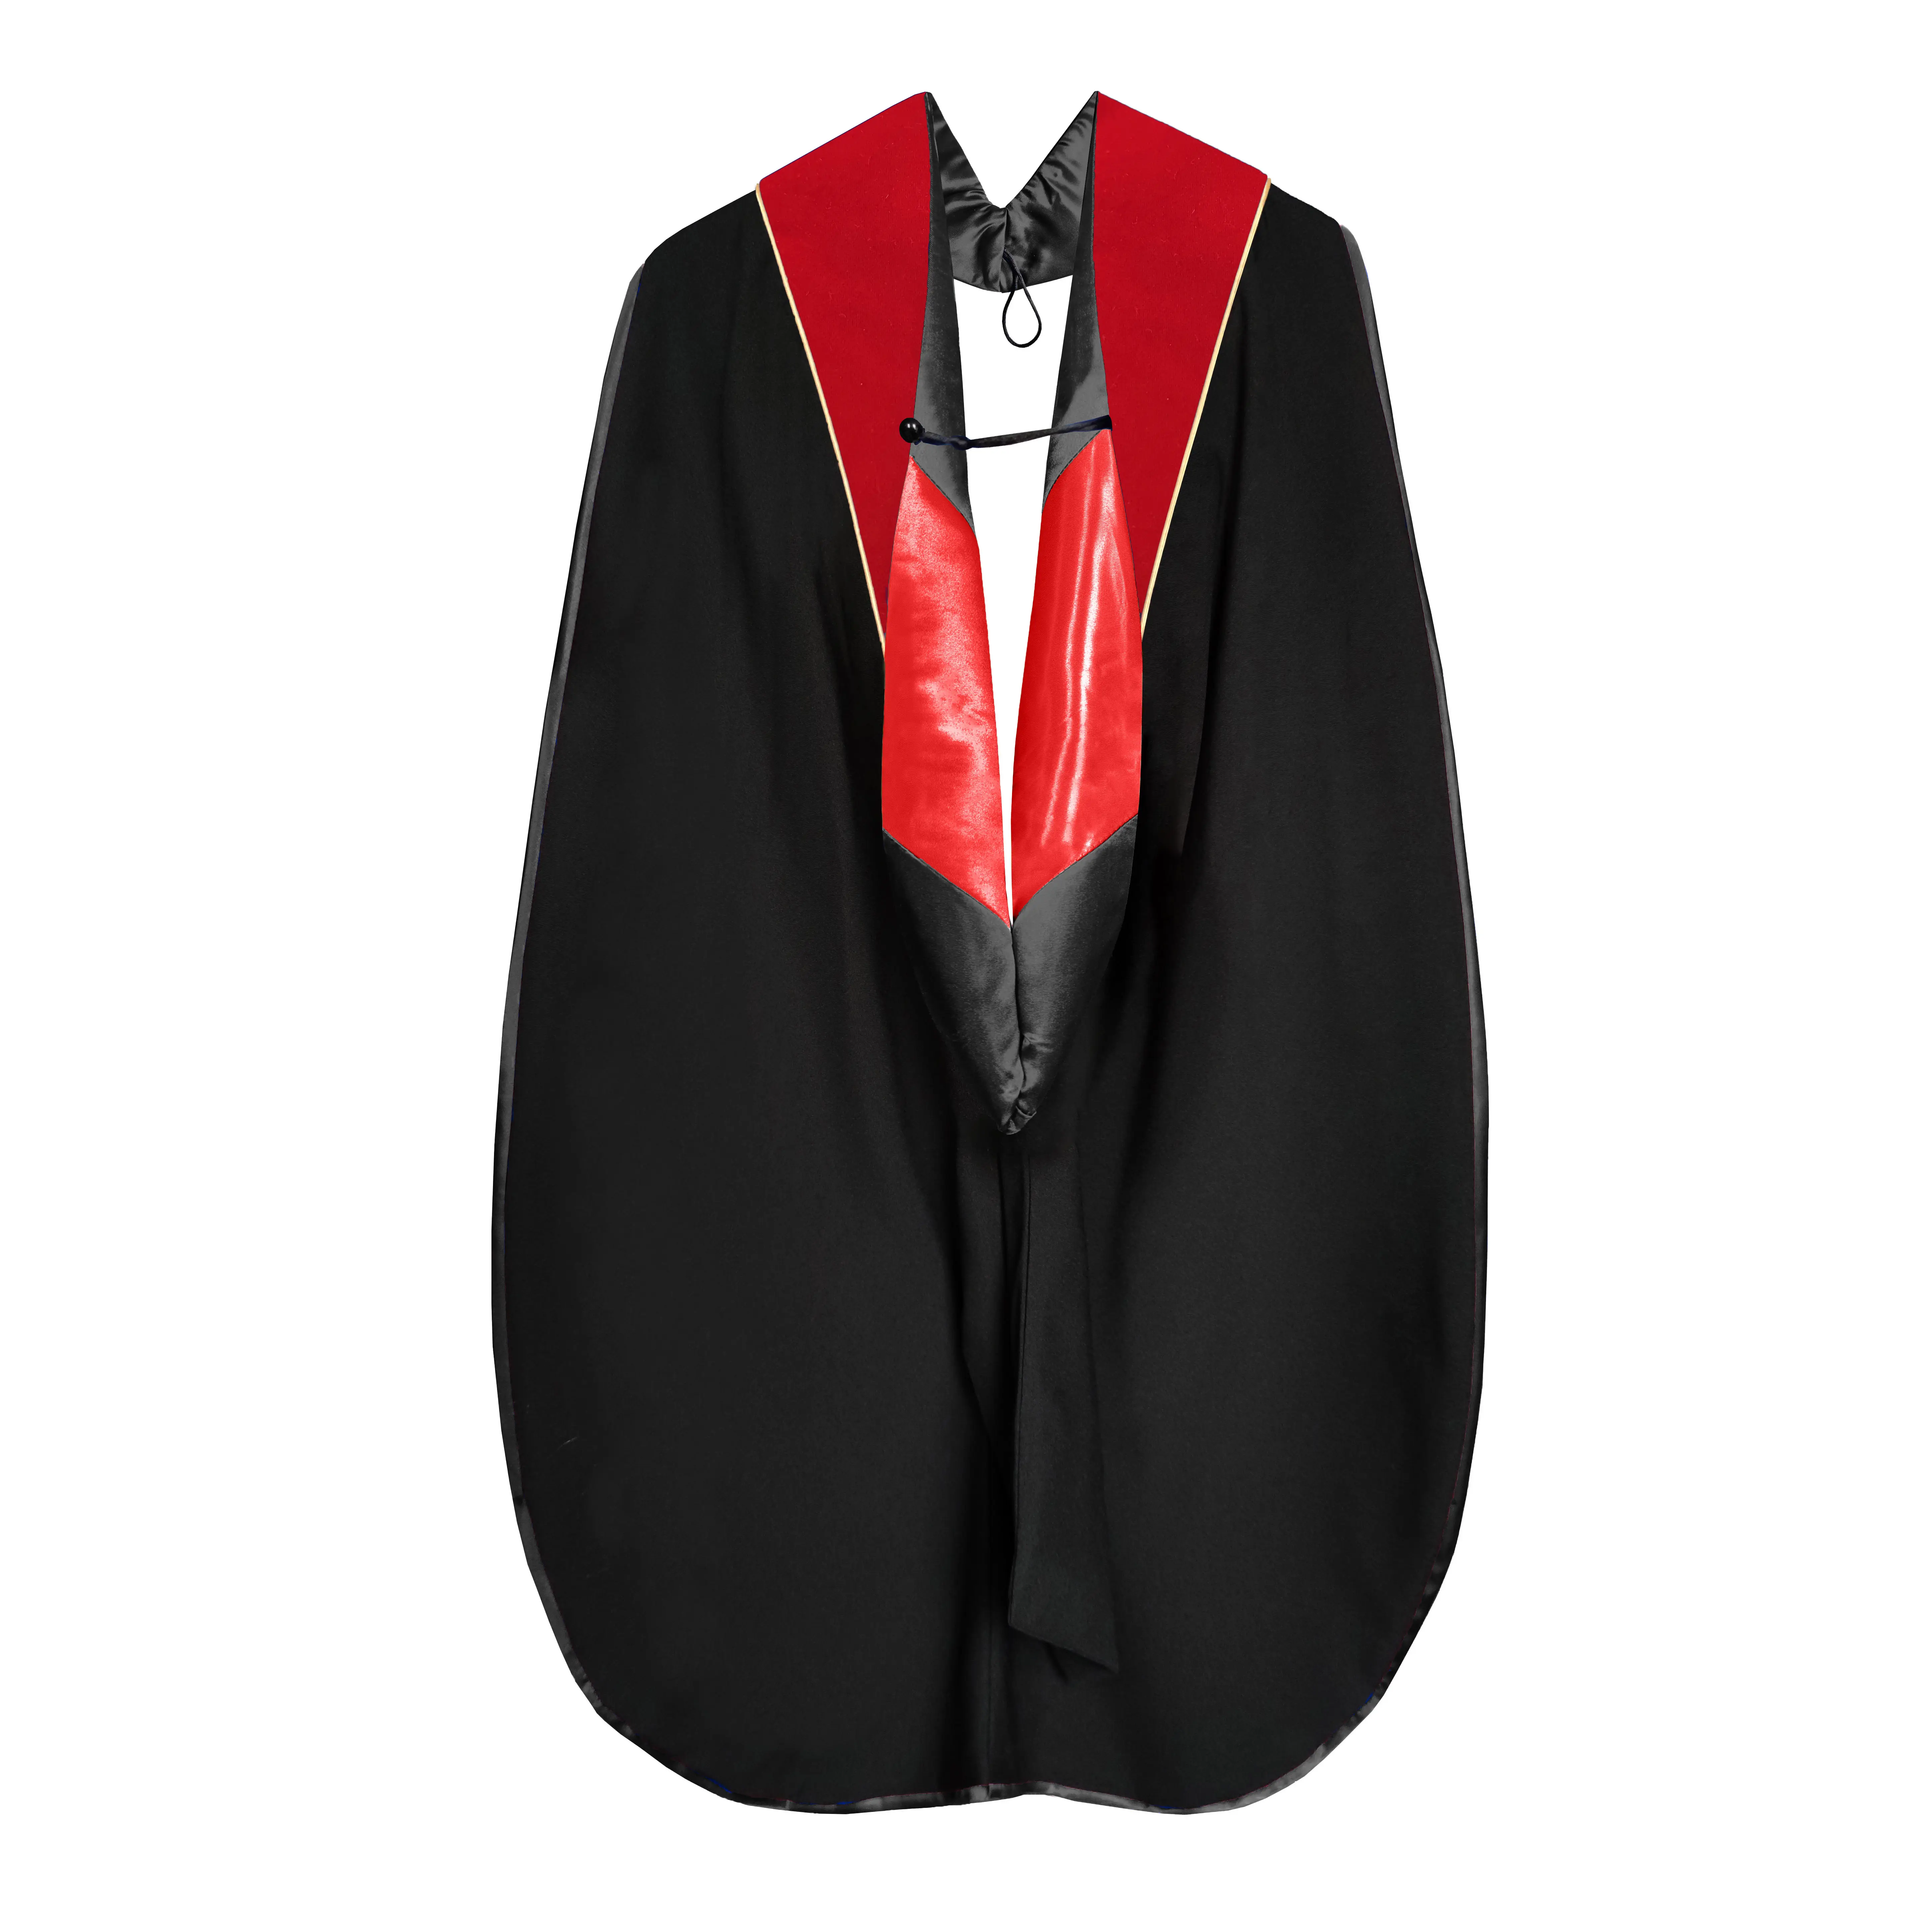 Deluxe Graduation PHD Hood, Docotoral Hood- With Gold Pipping